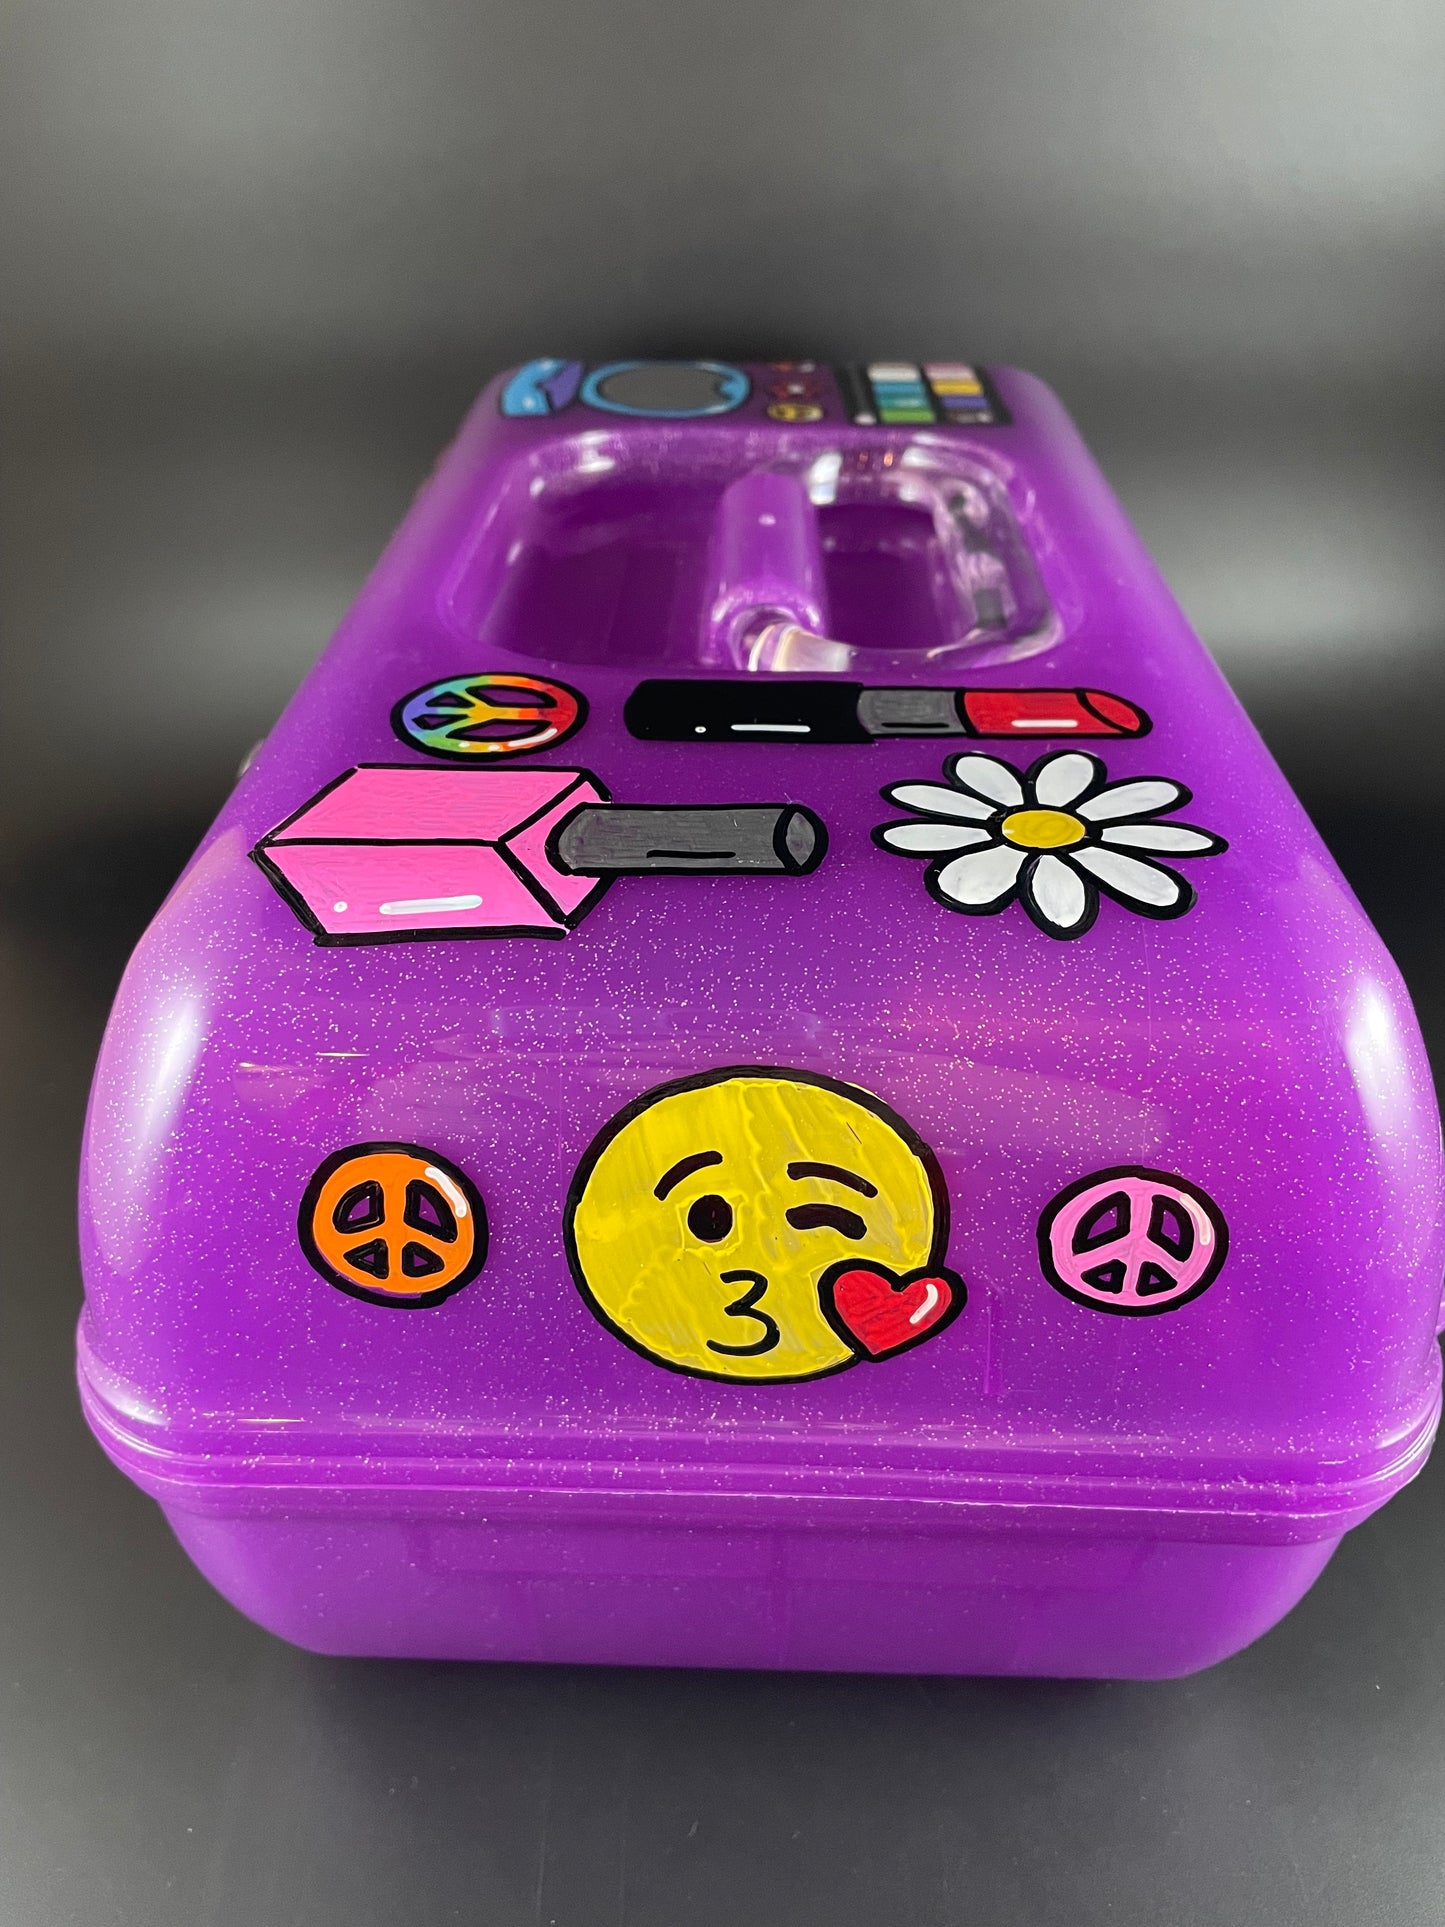 "Simmy" hand-painted personalized caboodle